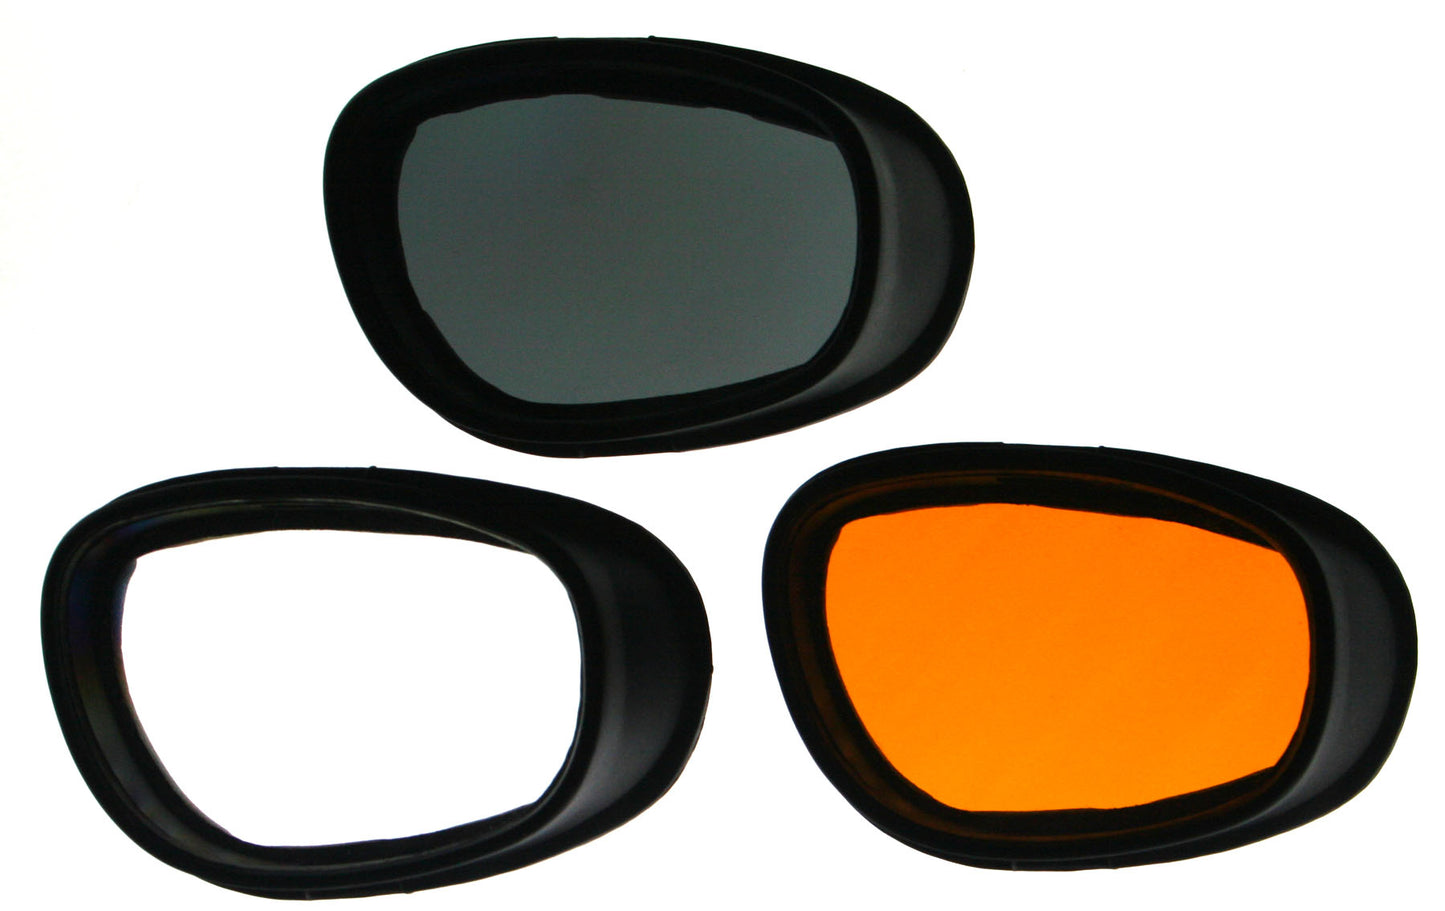 Bobster® Sport and Street 2 Matte Black Frame Smoked-Amber-Clear Lens